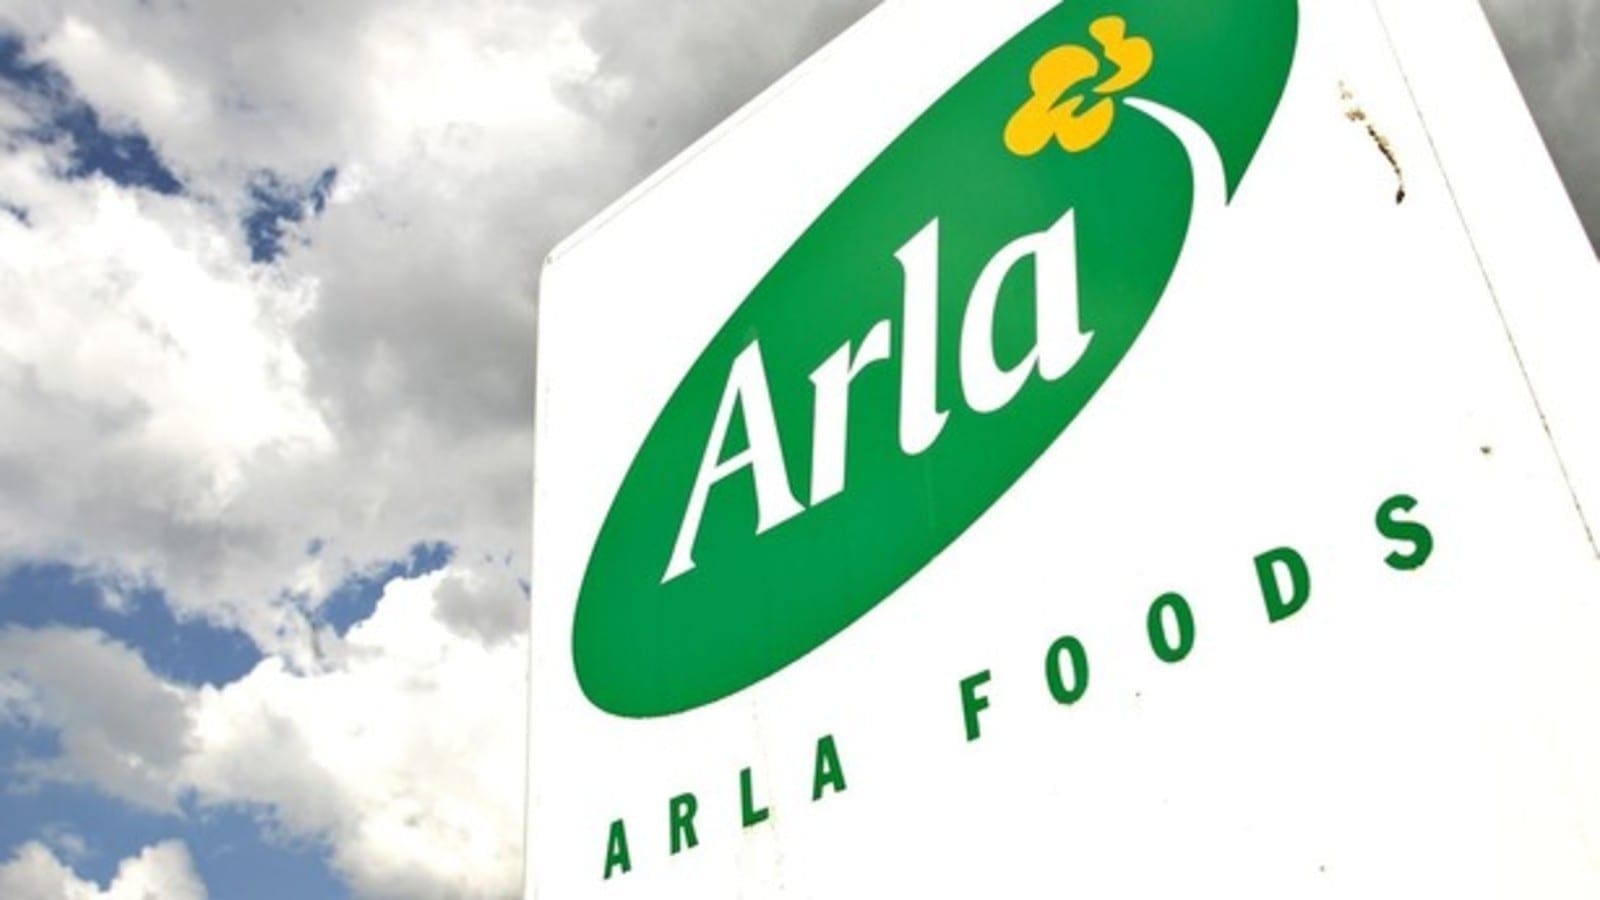 Arla Foods appoints Lillie Li Valeur as Managing Director for Germany, Hansson to assume CMO role